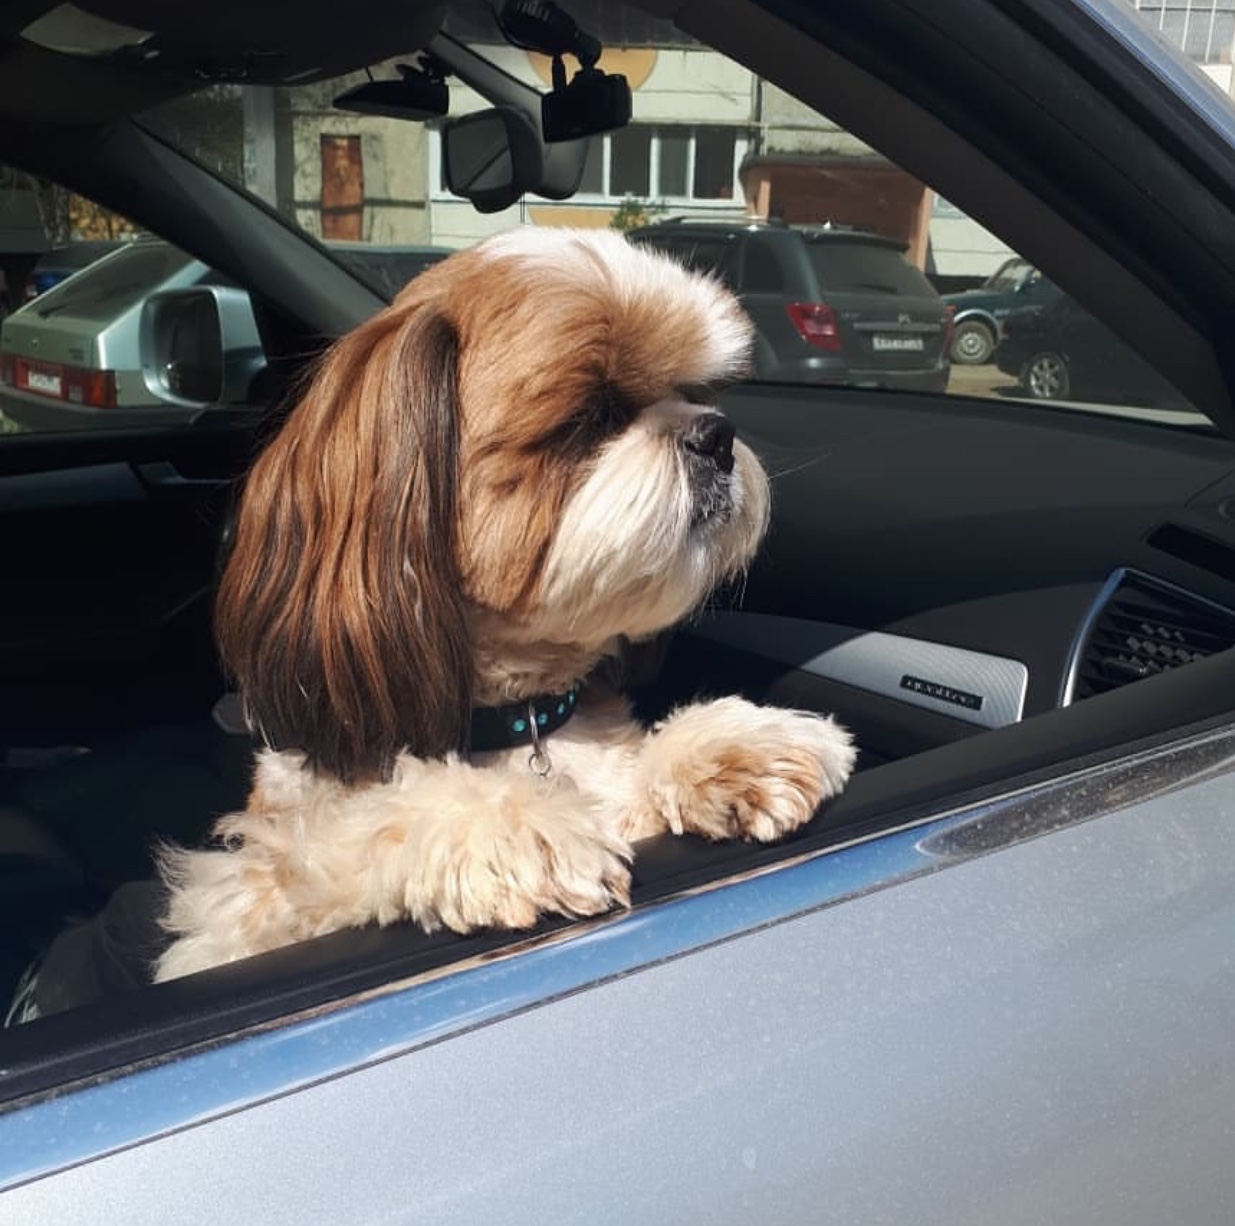 A Shih Tzu leaning towards the window in the car